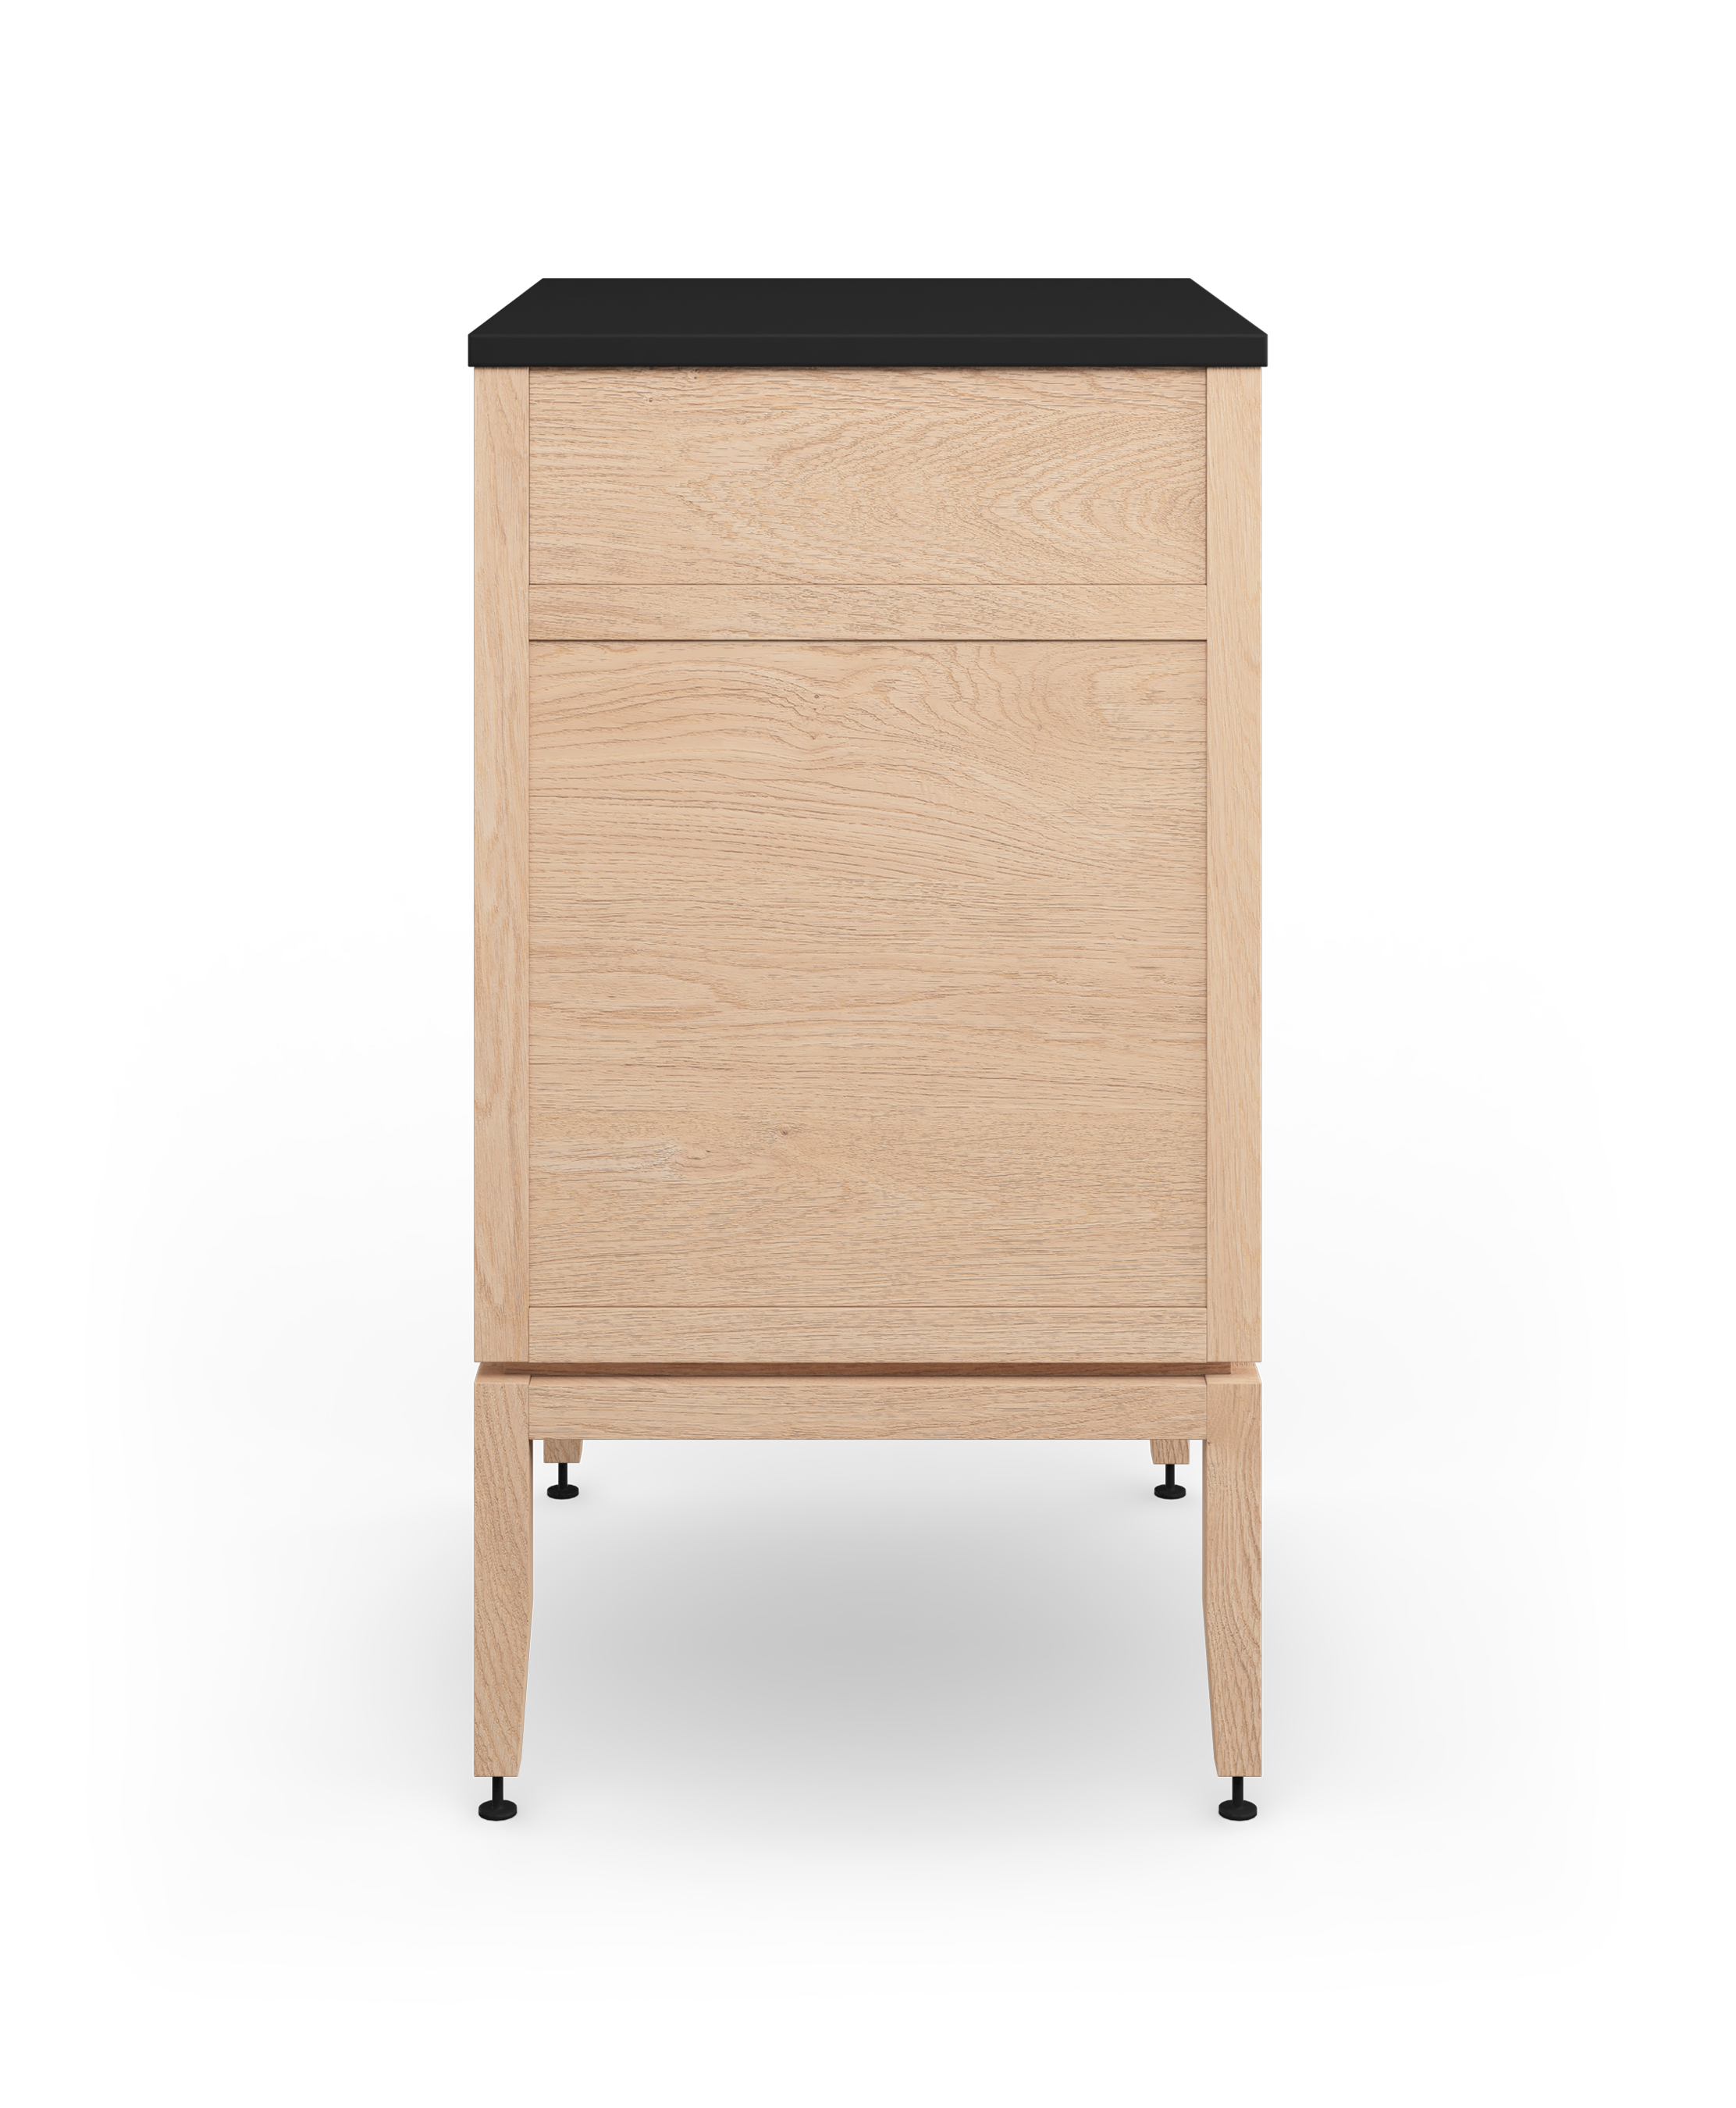 Coquo modular bathroom vanity with three drawers in natural oak. 